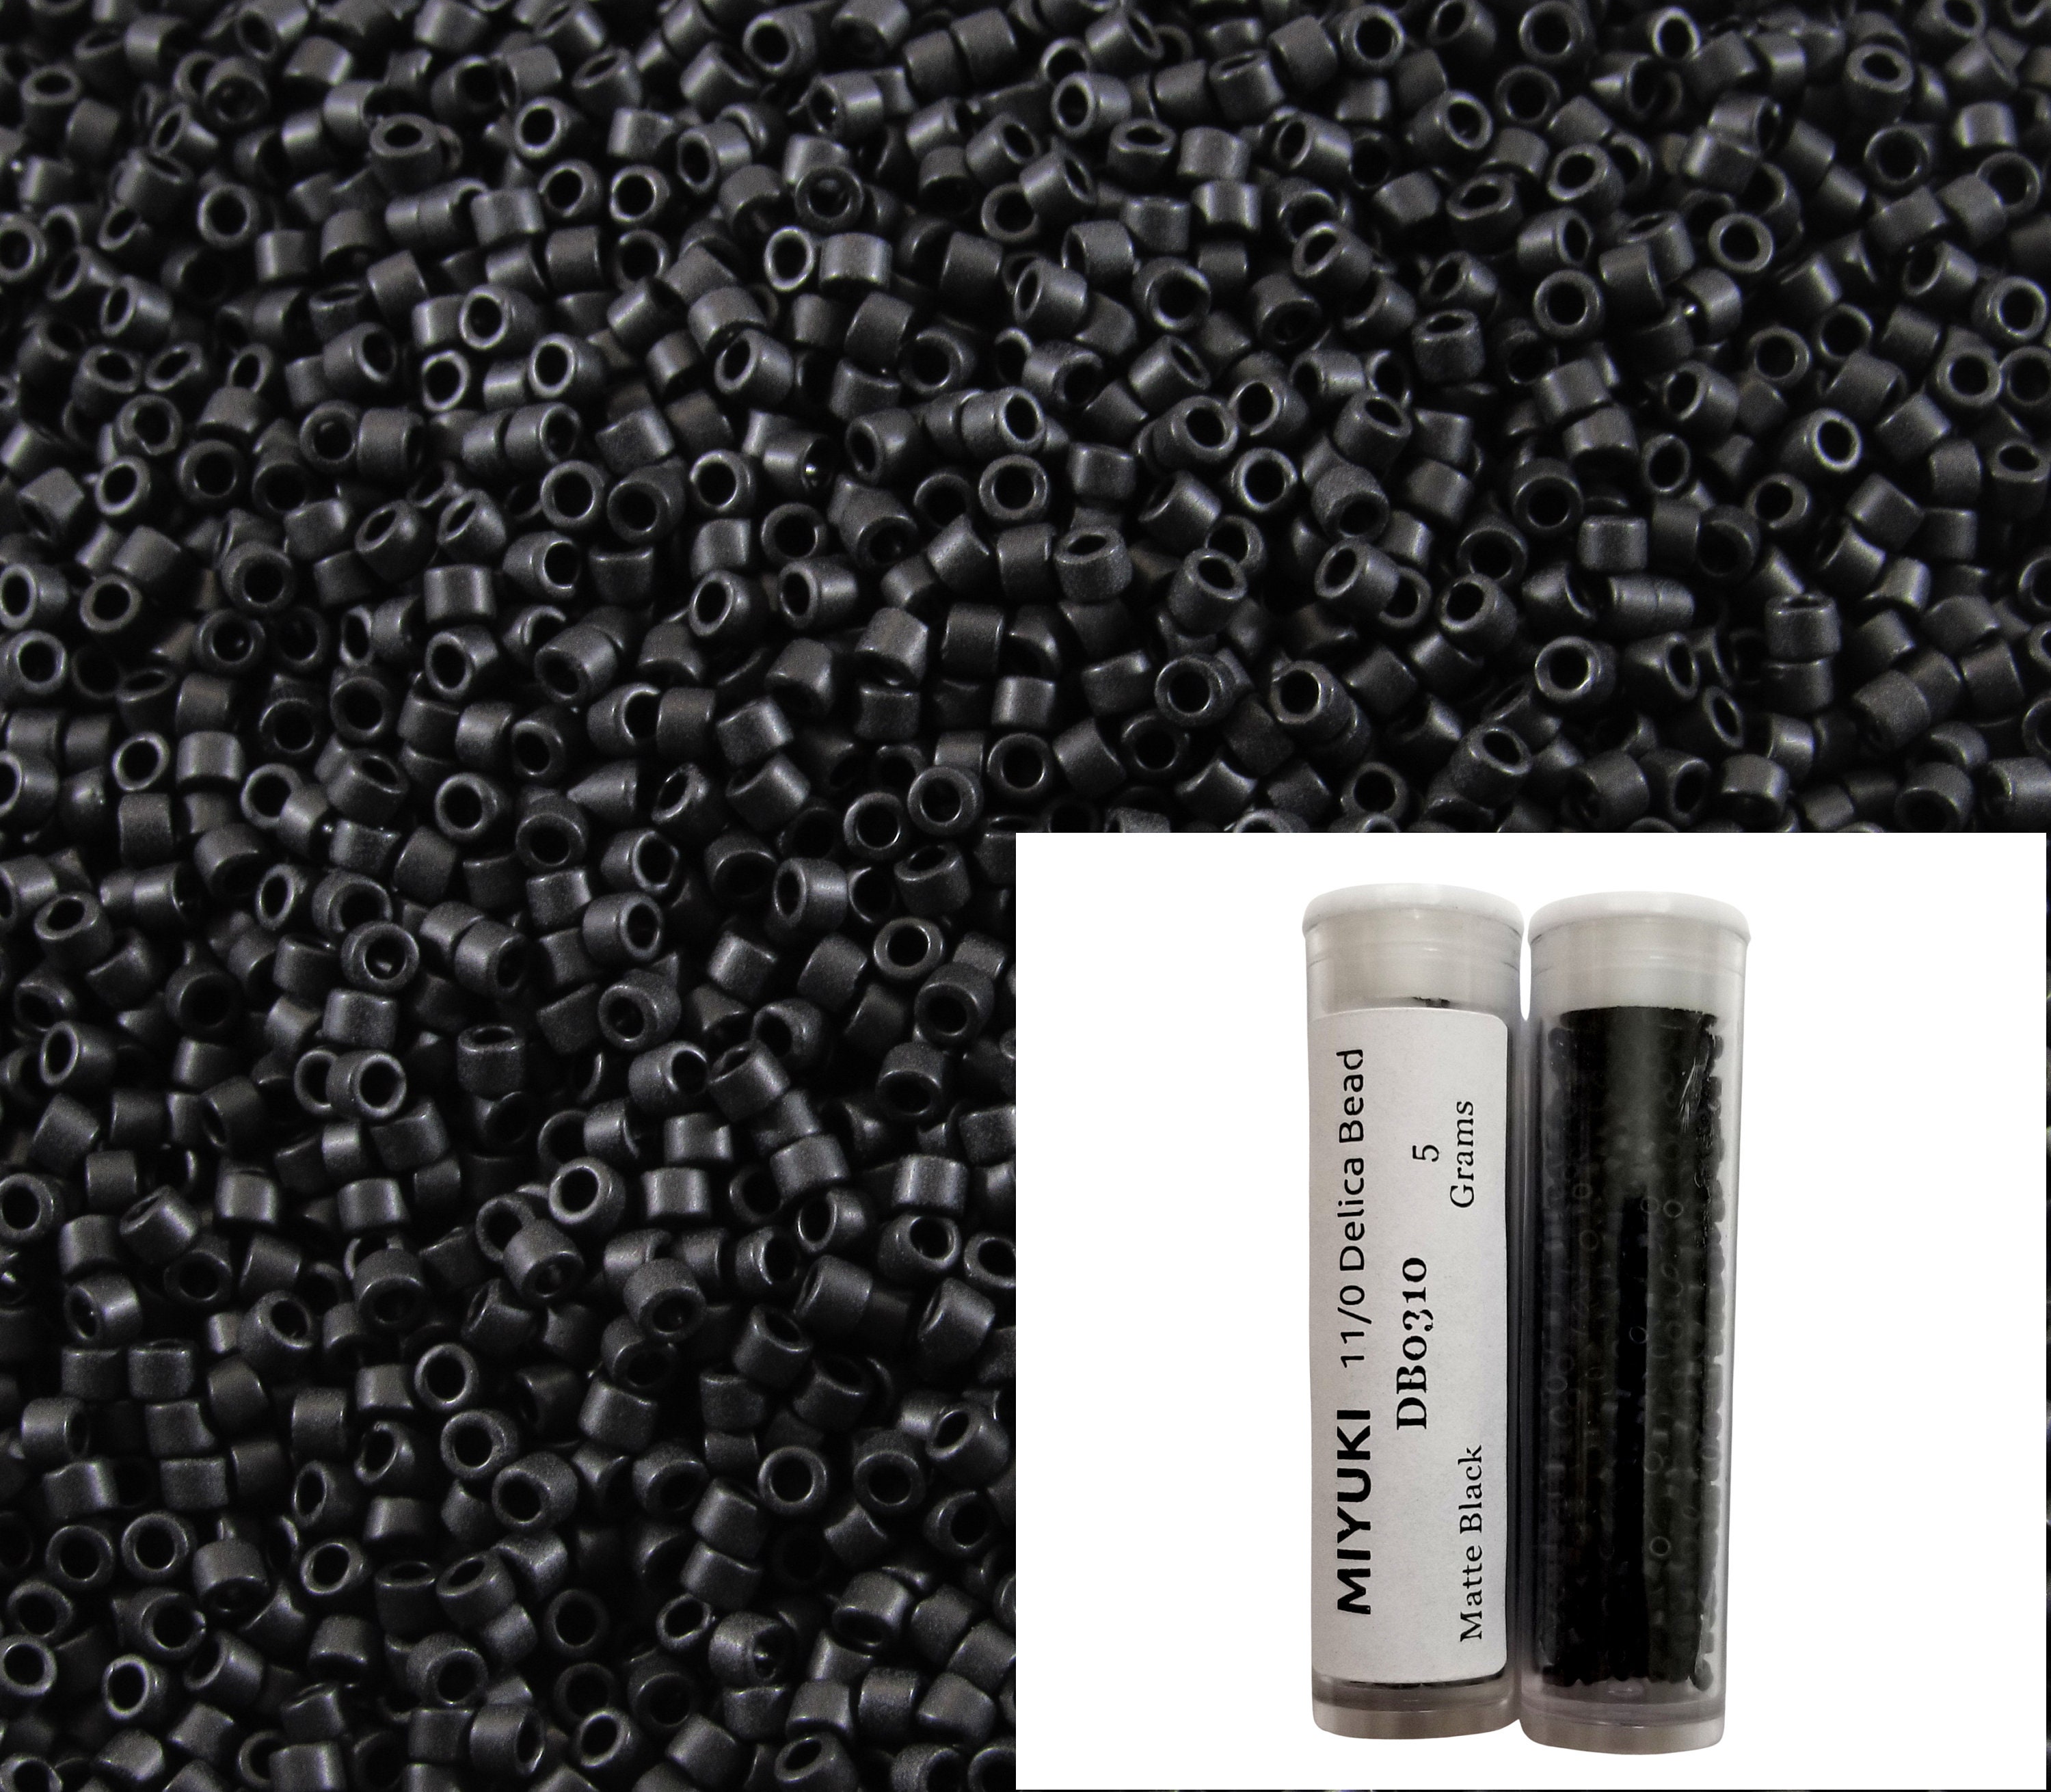 Seed bead, Delica®, glass, opaque matte black, (DB0310), #11 round. Sold  per 7.5-gram pkg. - Fire Mountain Gems and Beads